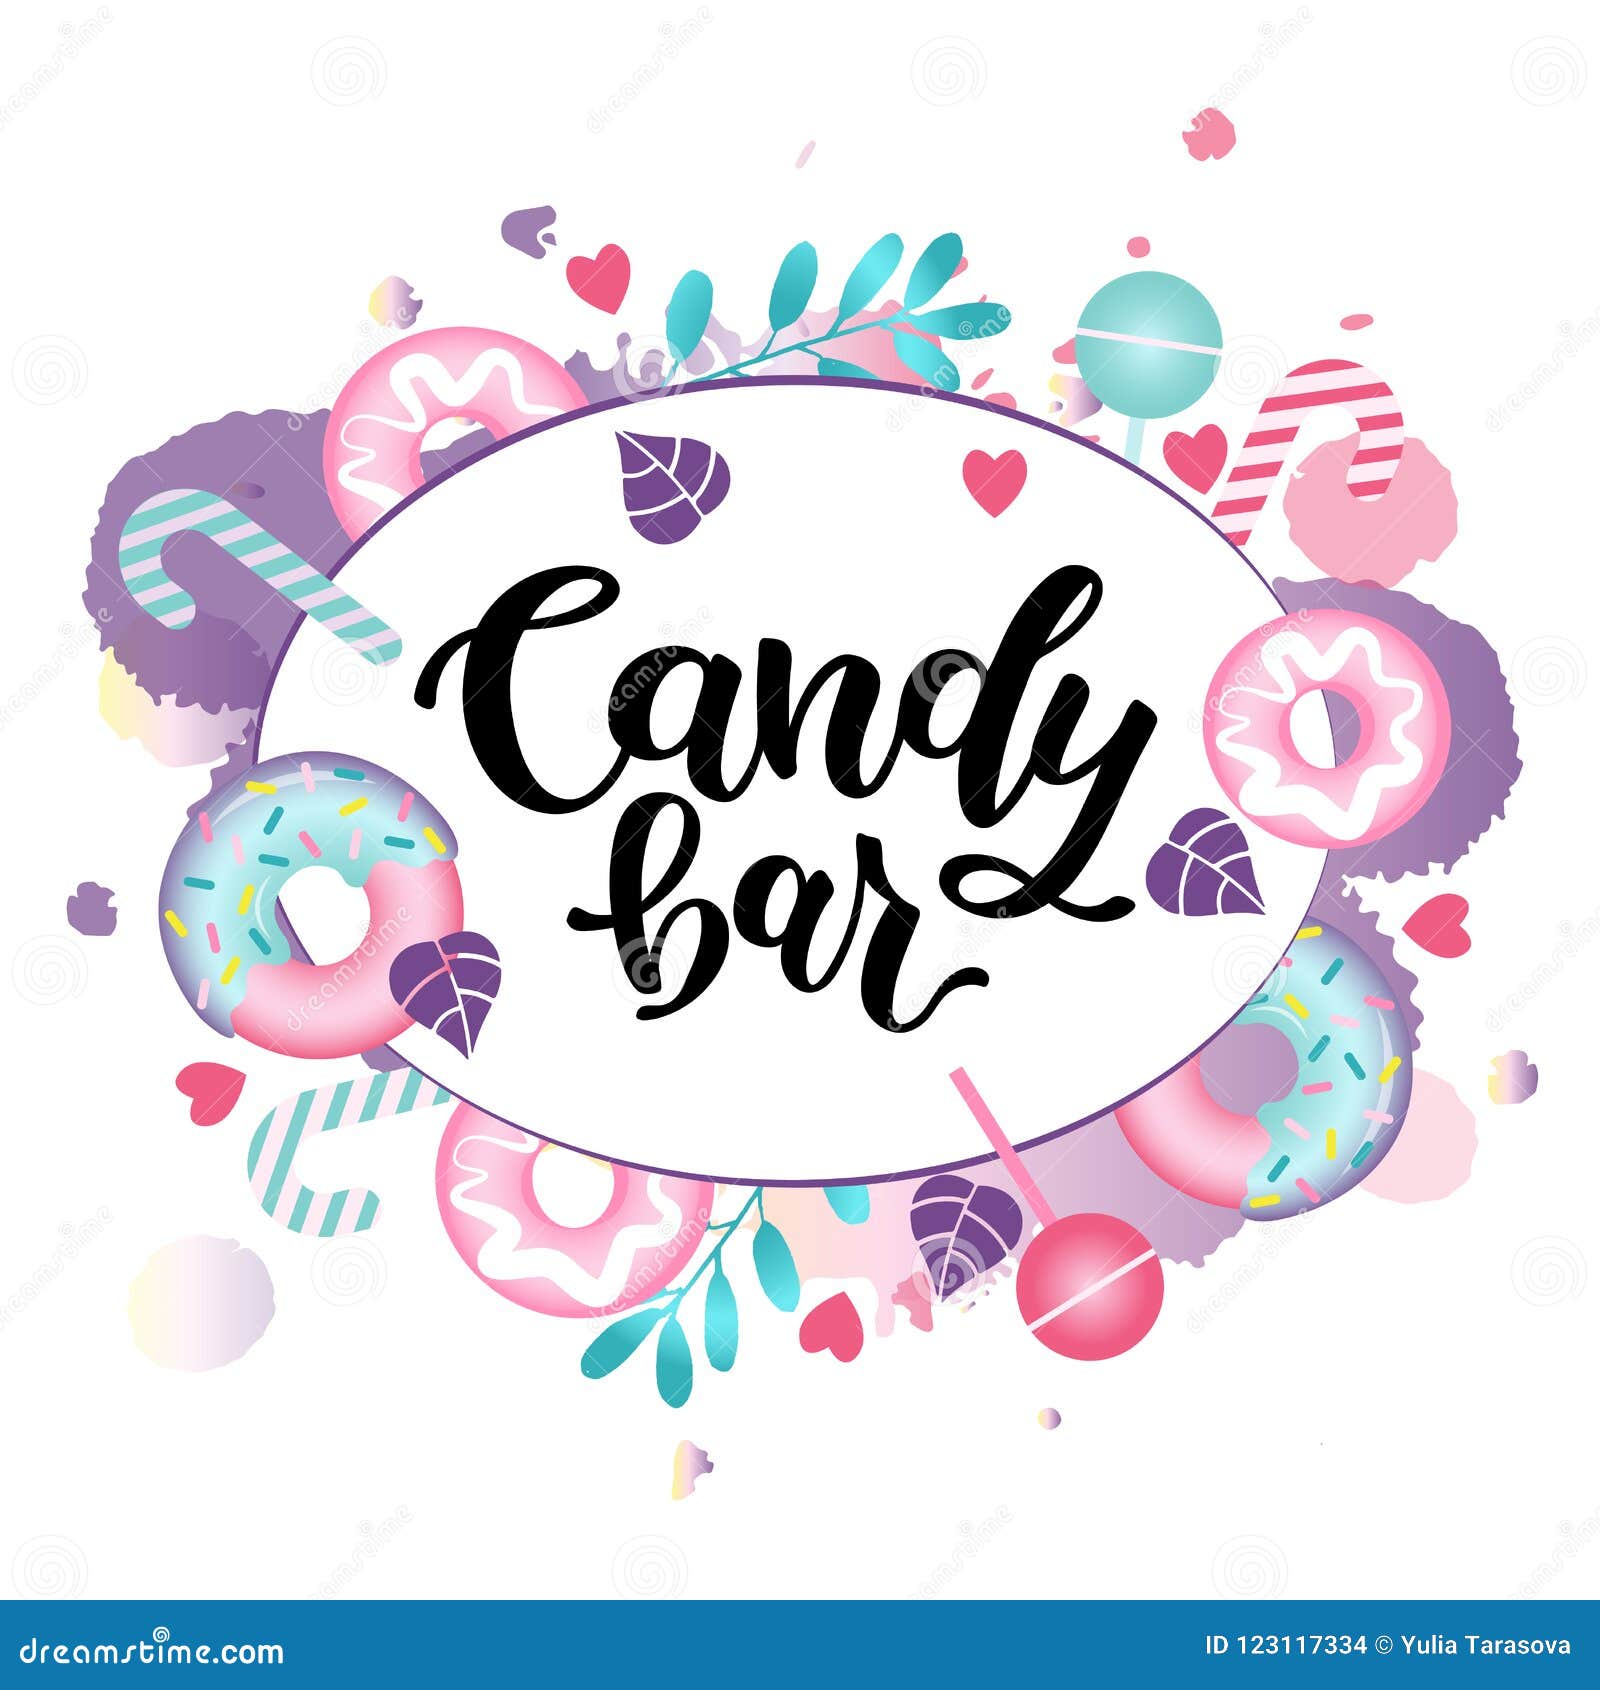 Candy bar stock vector. Illustration of food, delicious - 123117334